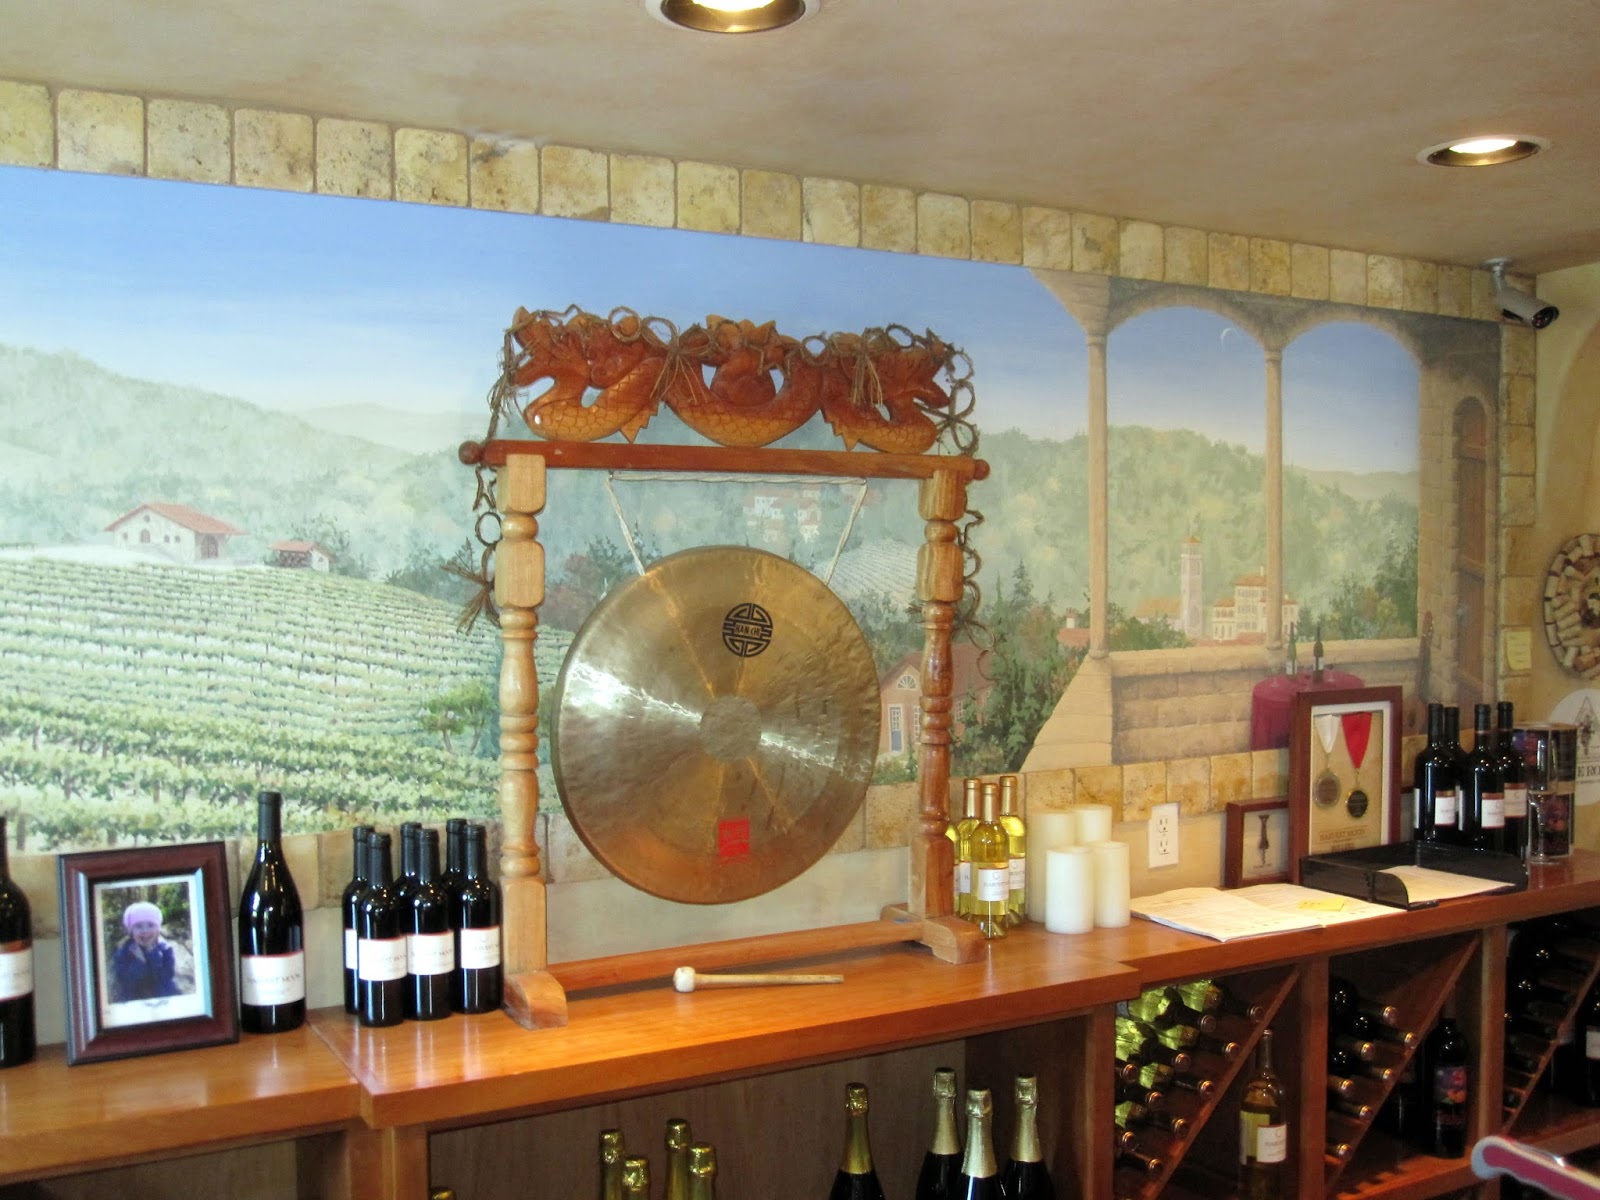 The Harvest Moon Winery